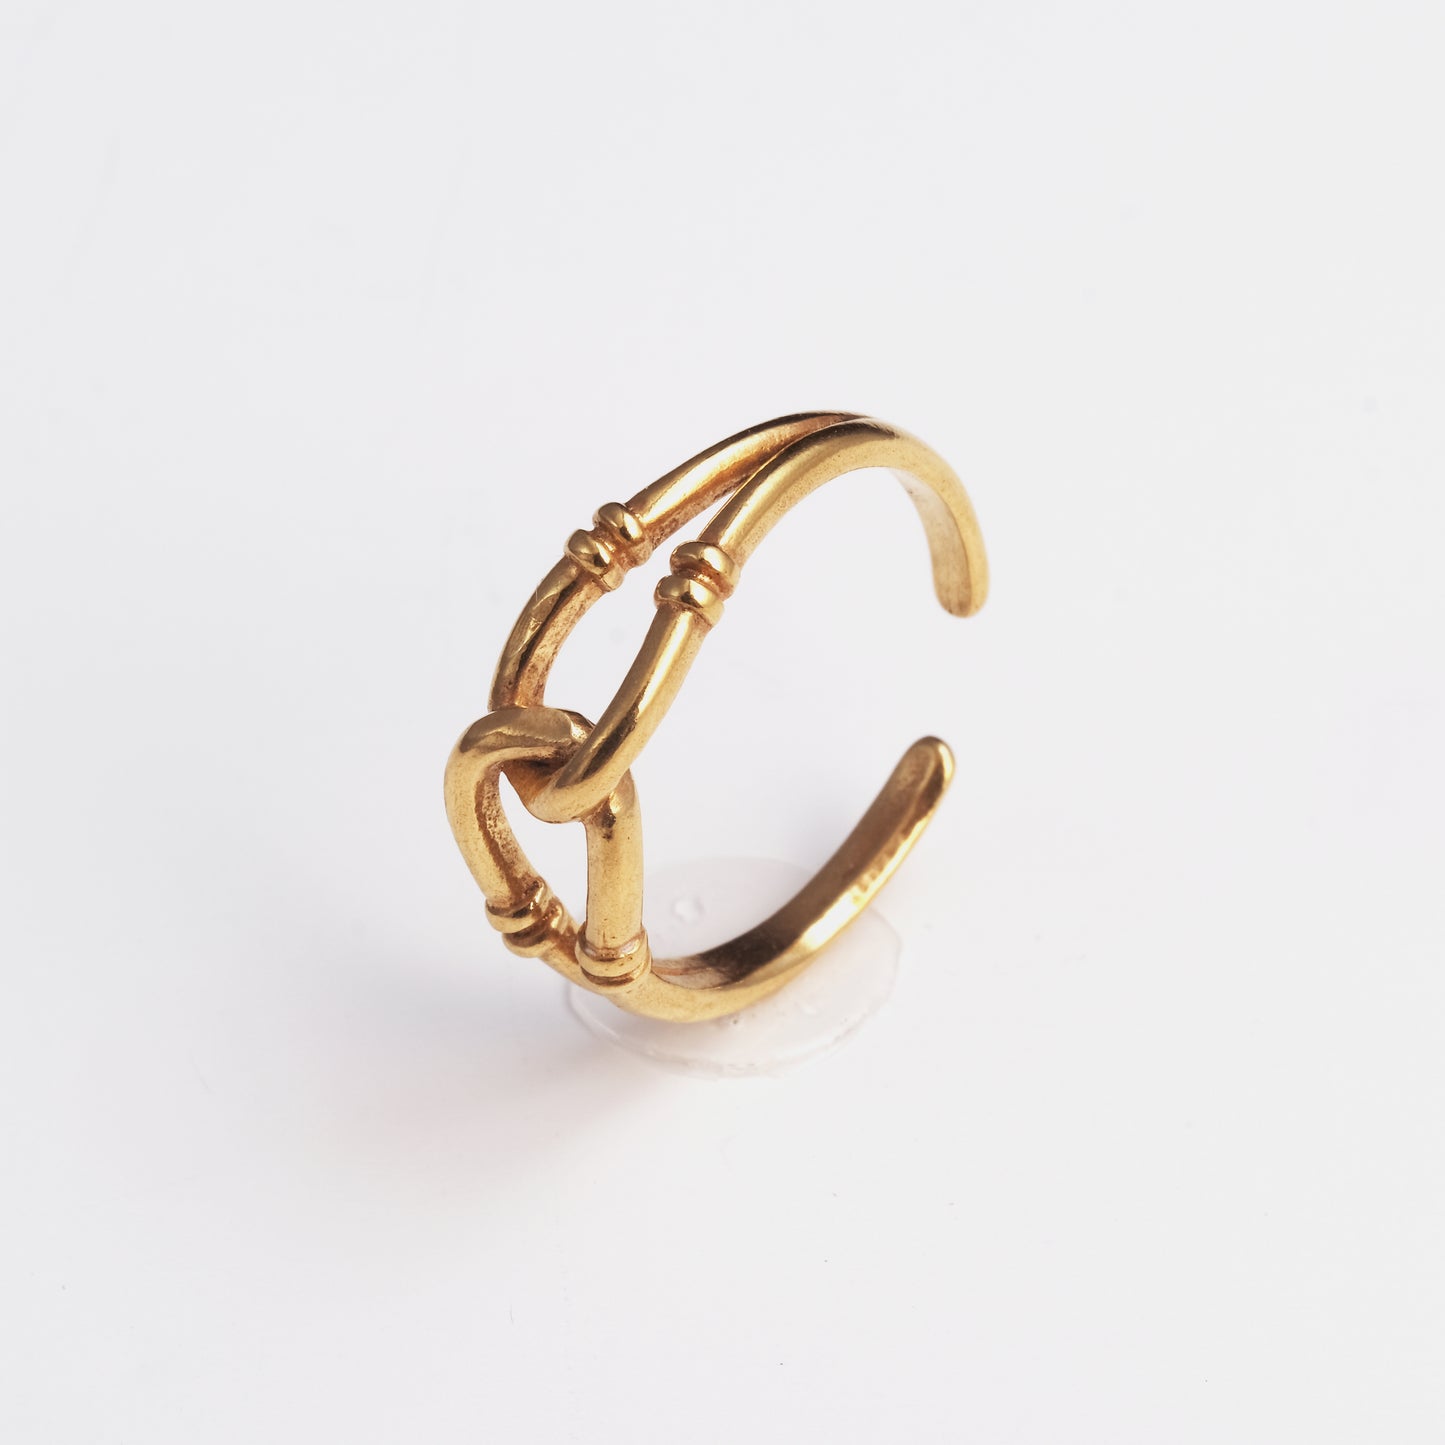 Linked ring